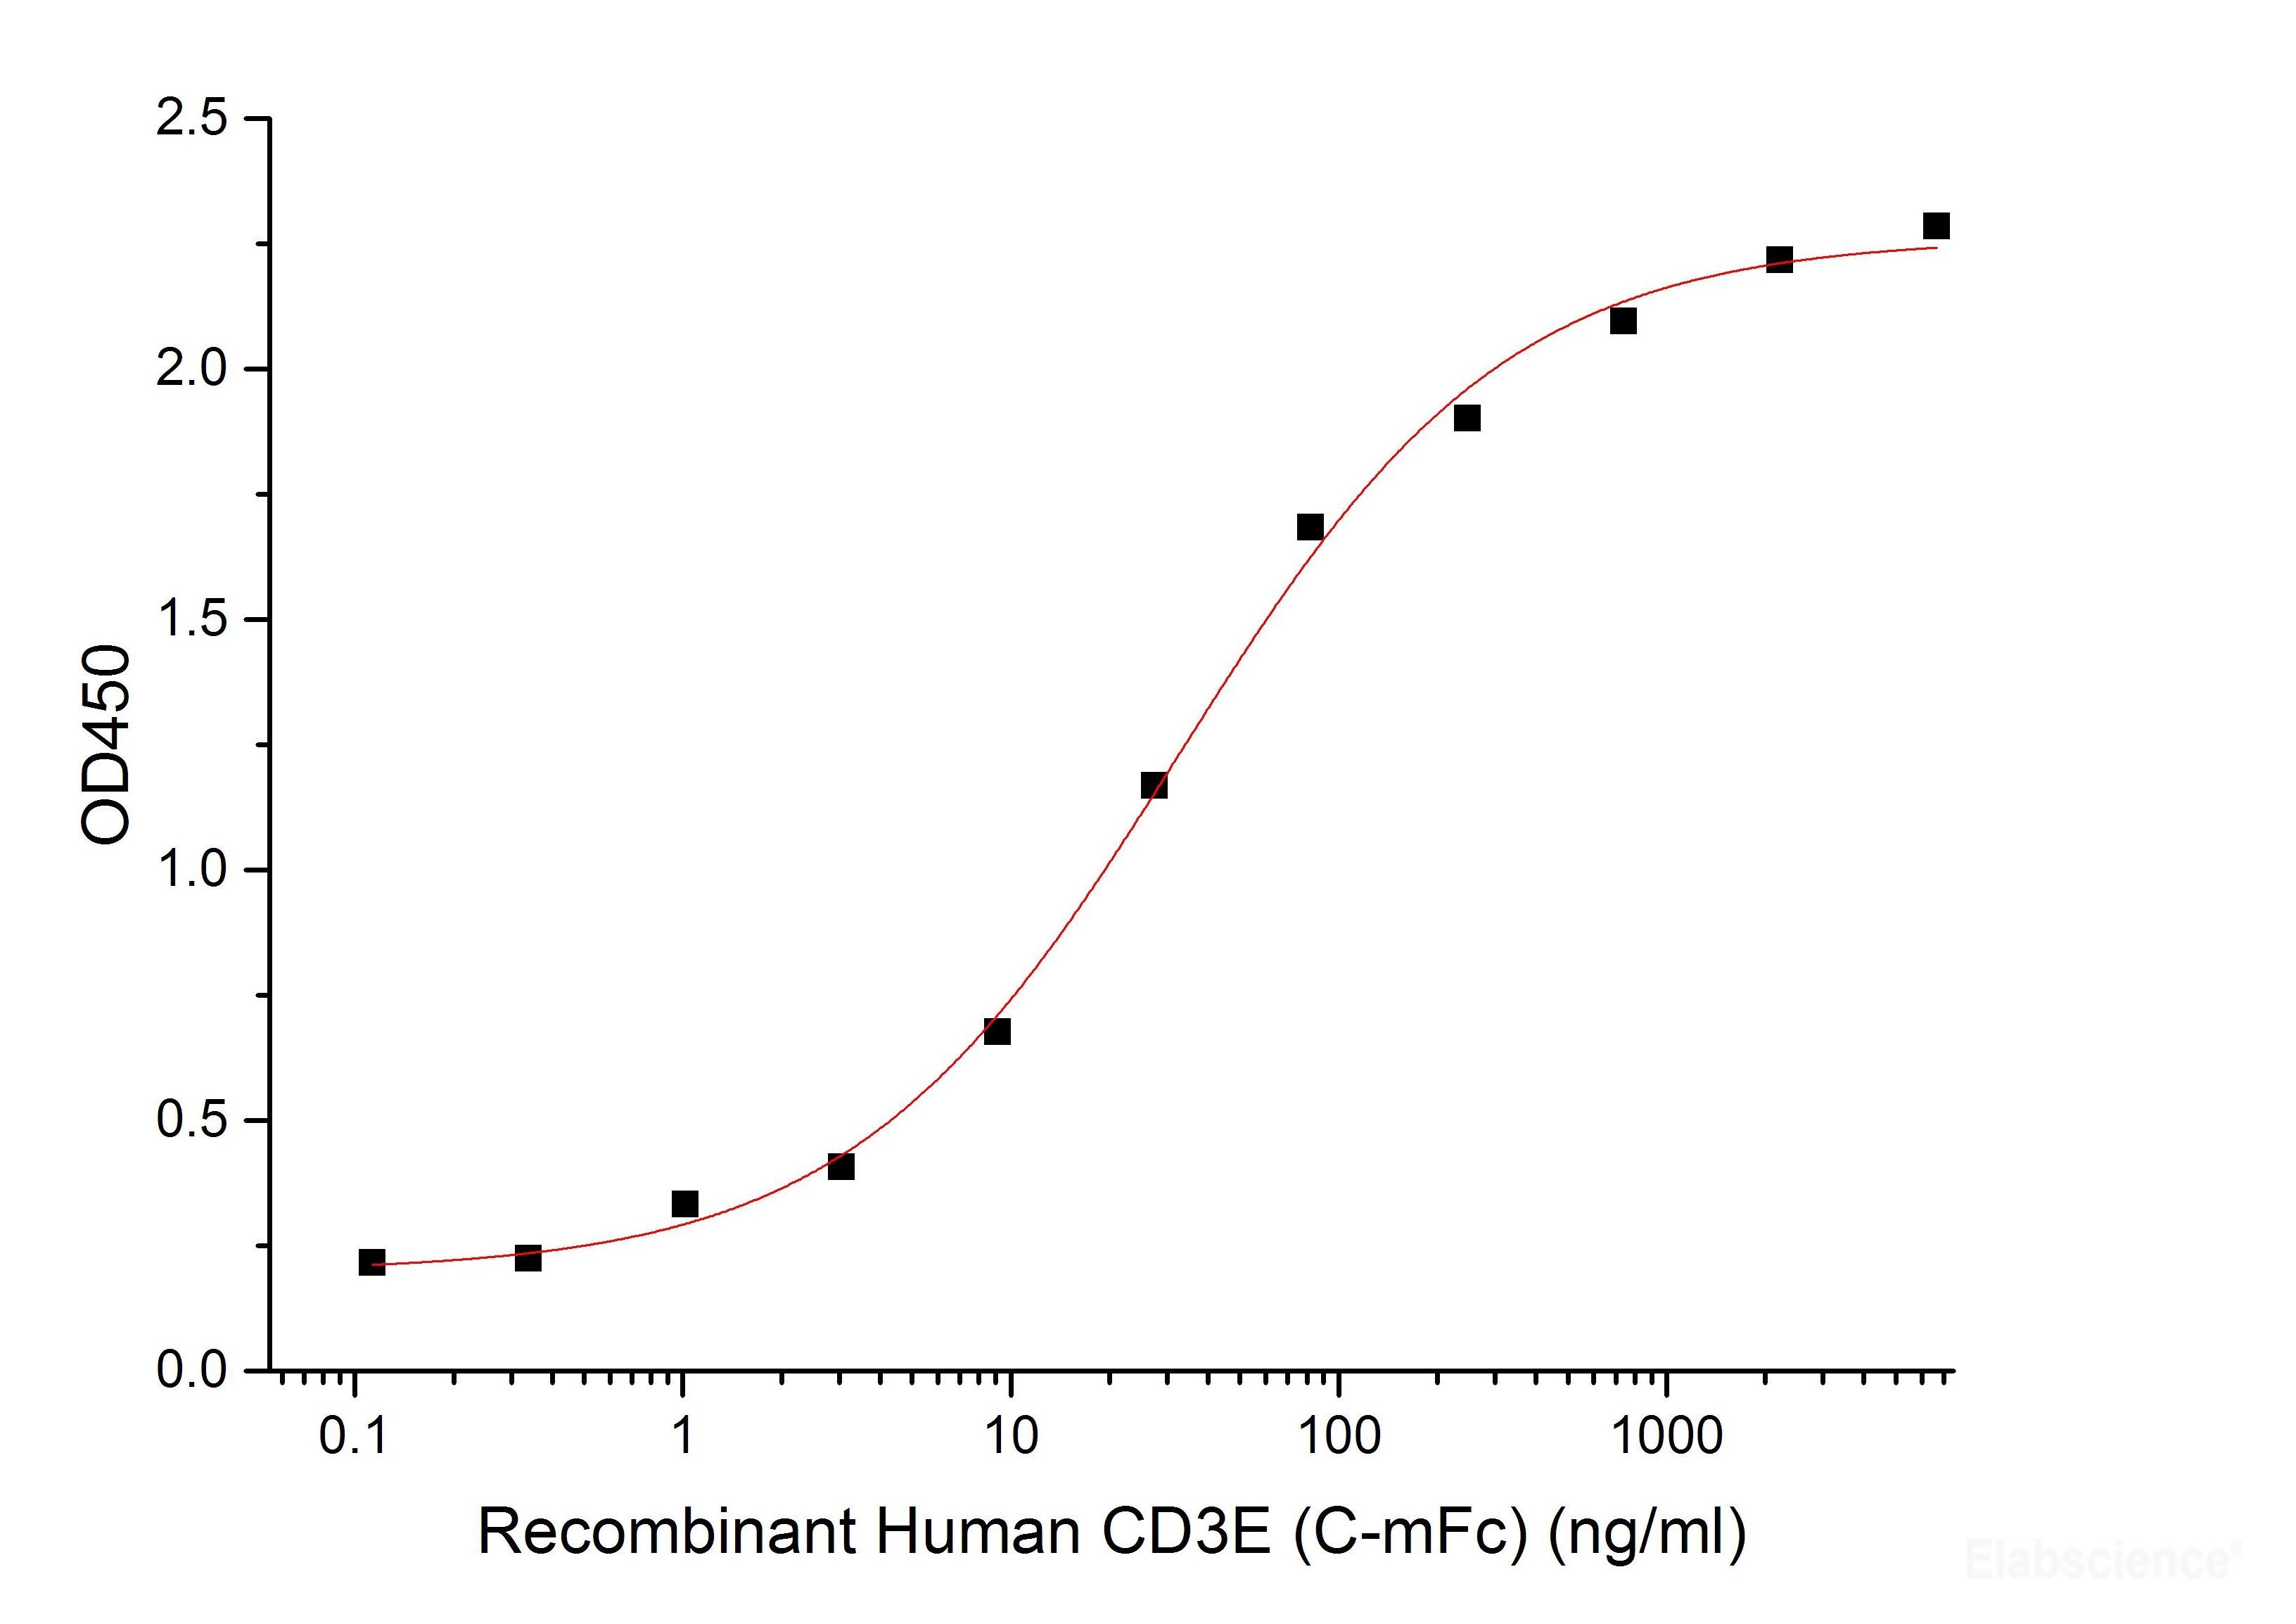 Immobilized Human CD3E-mFc(Cat#PKSH033869) at 10μg/ml (100 μl/well) can bind Human Anti-CD3. The ED50 of Human CD3E-mFc(Cat#PKSH033869)is 9.4 ng/ml.